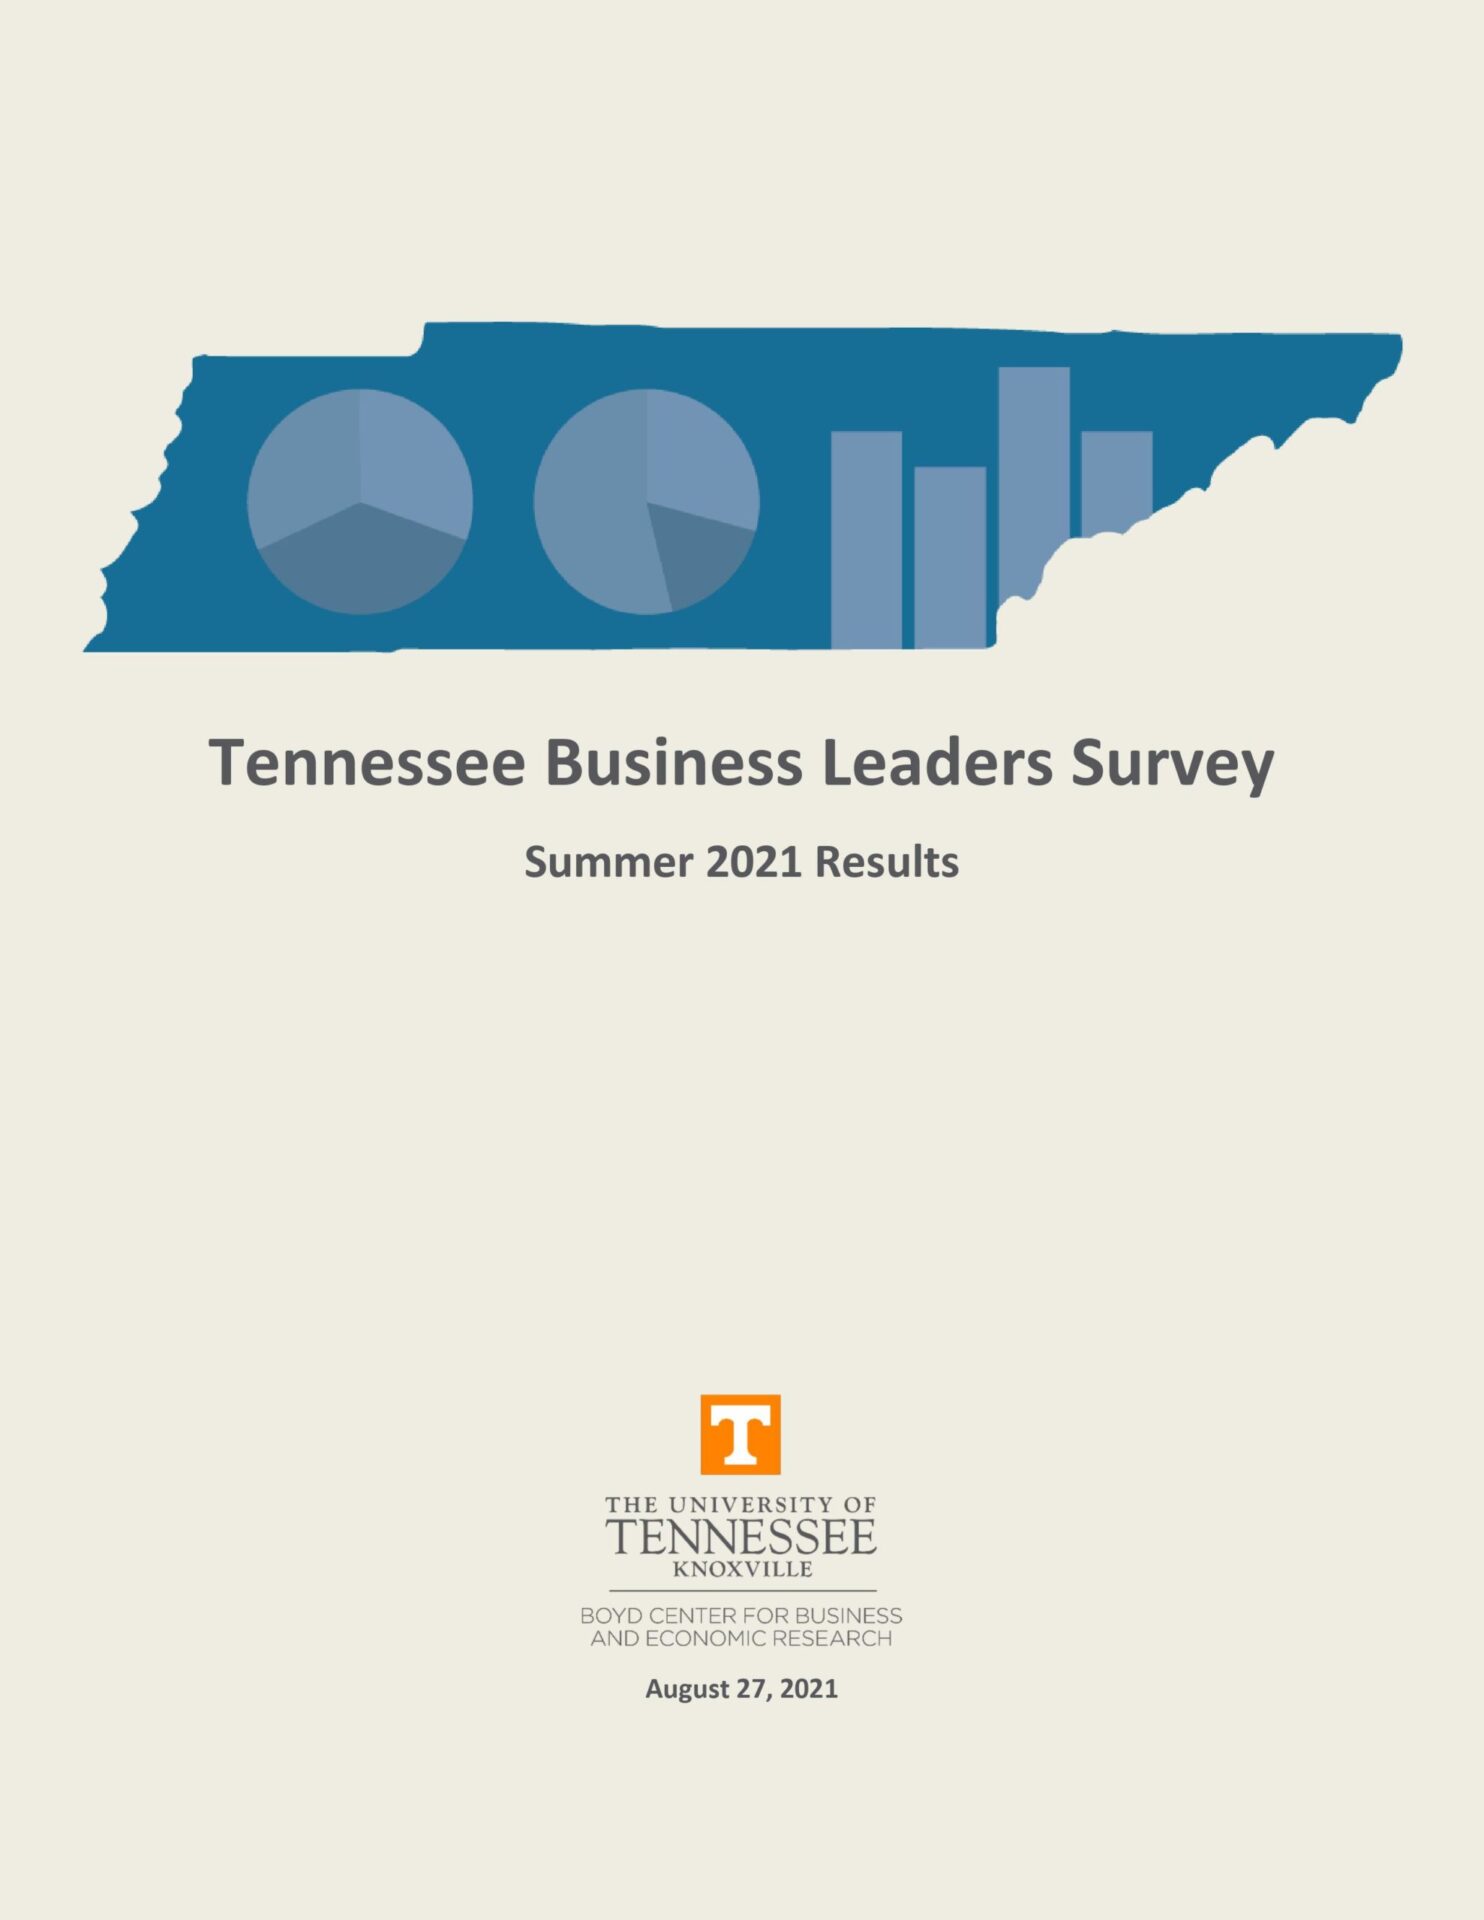 Tennessee Business Leaders Survey, Summer 2021